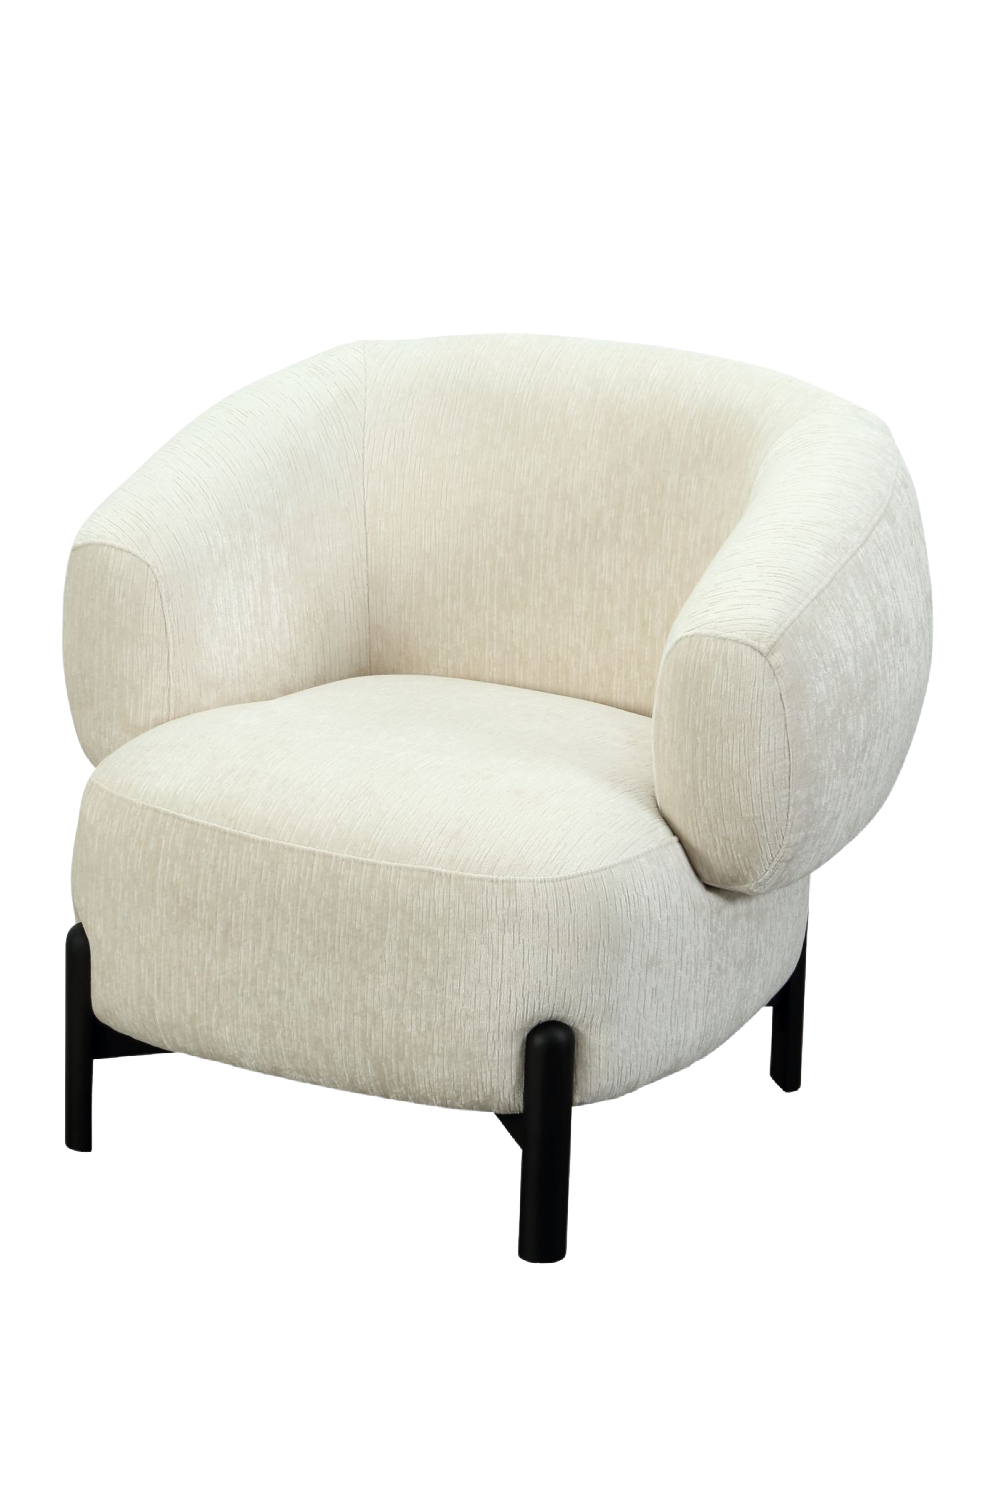 White Occasional Chair | Liang & Eimil Lapis | Oroa.com